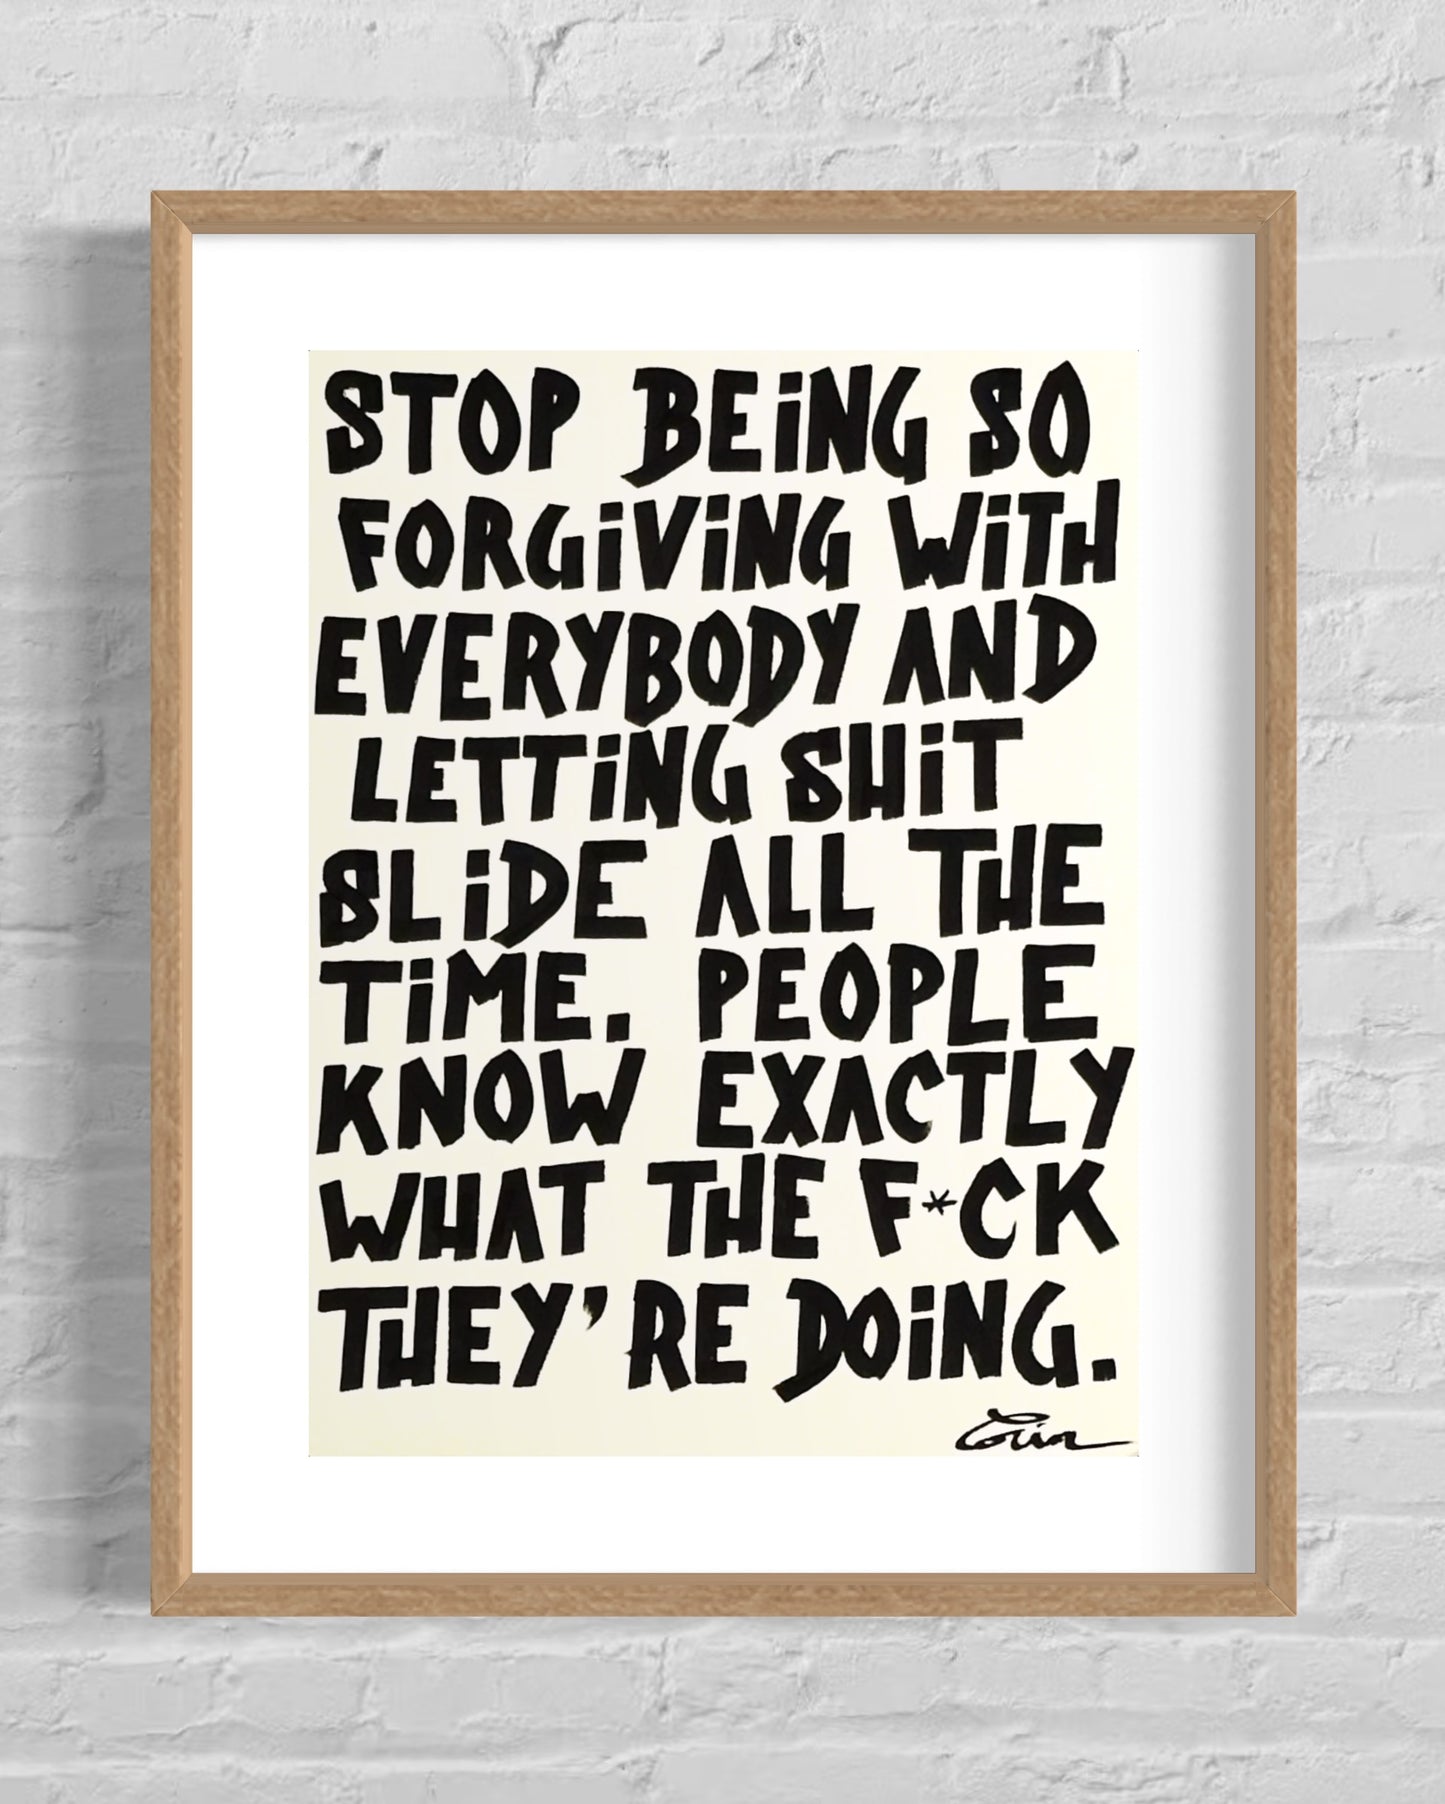 STOP BEING SO FORGIVING WITH...